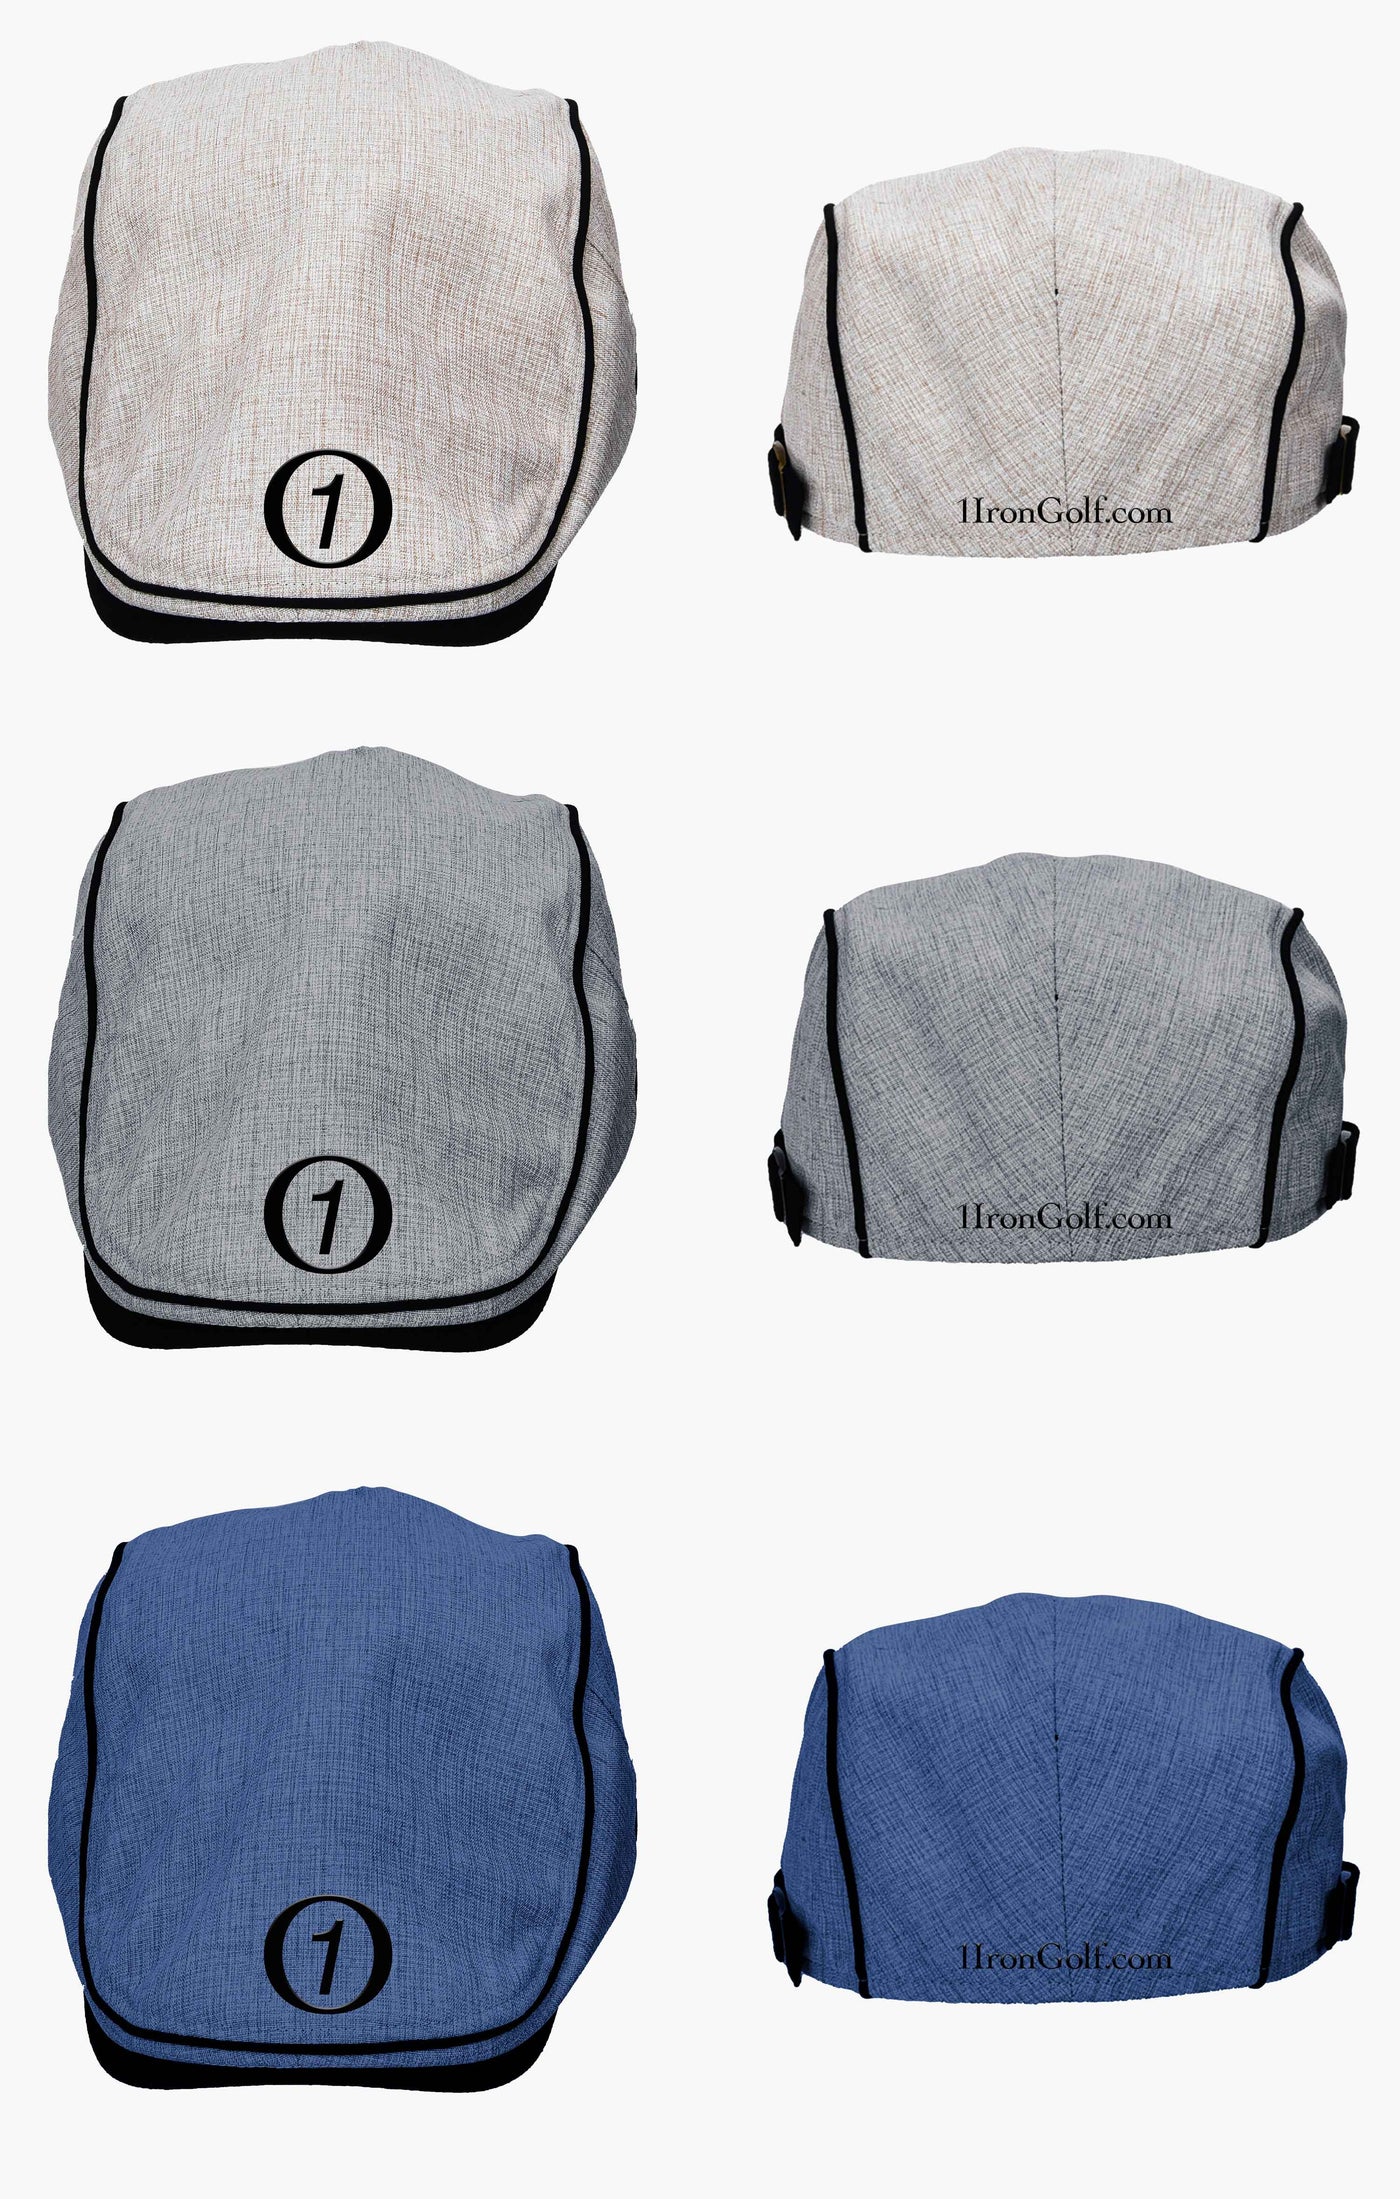 Flat Caps - 3 Color Options Cream, Gray, and Blue